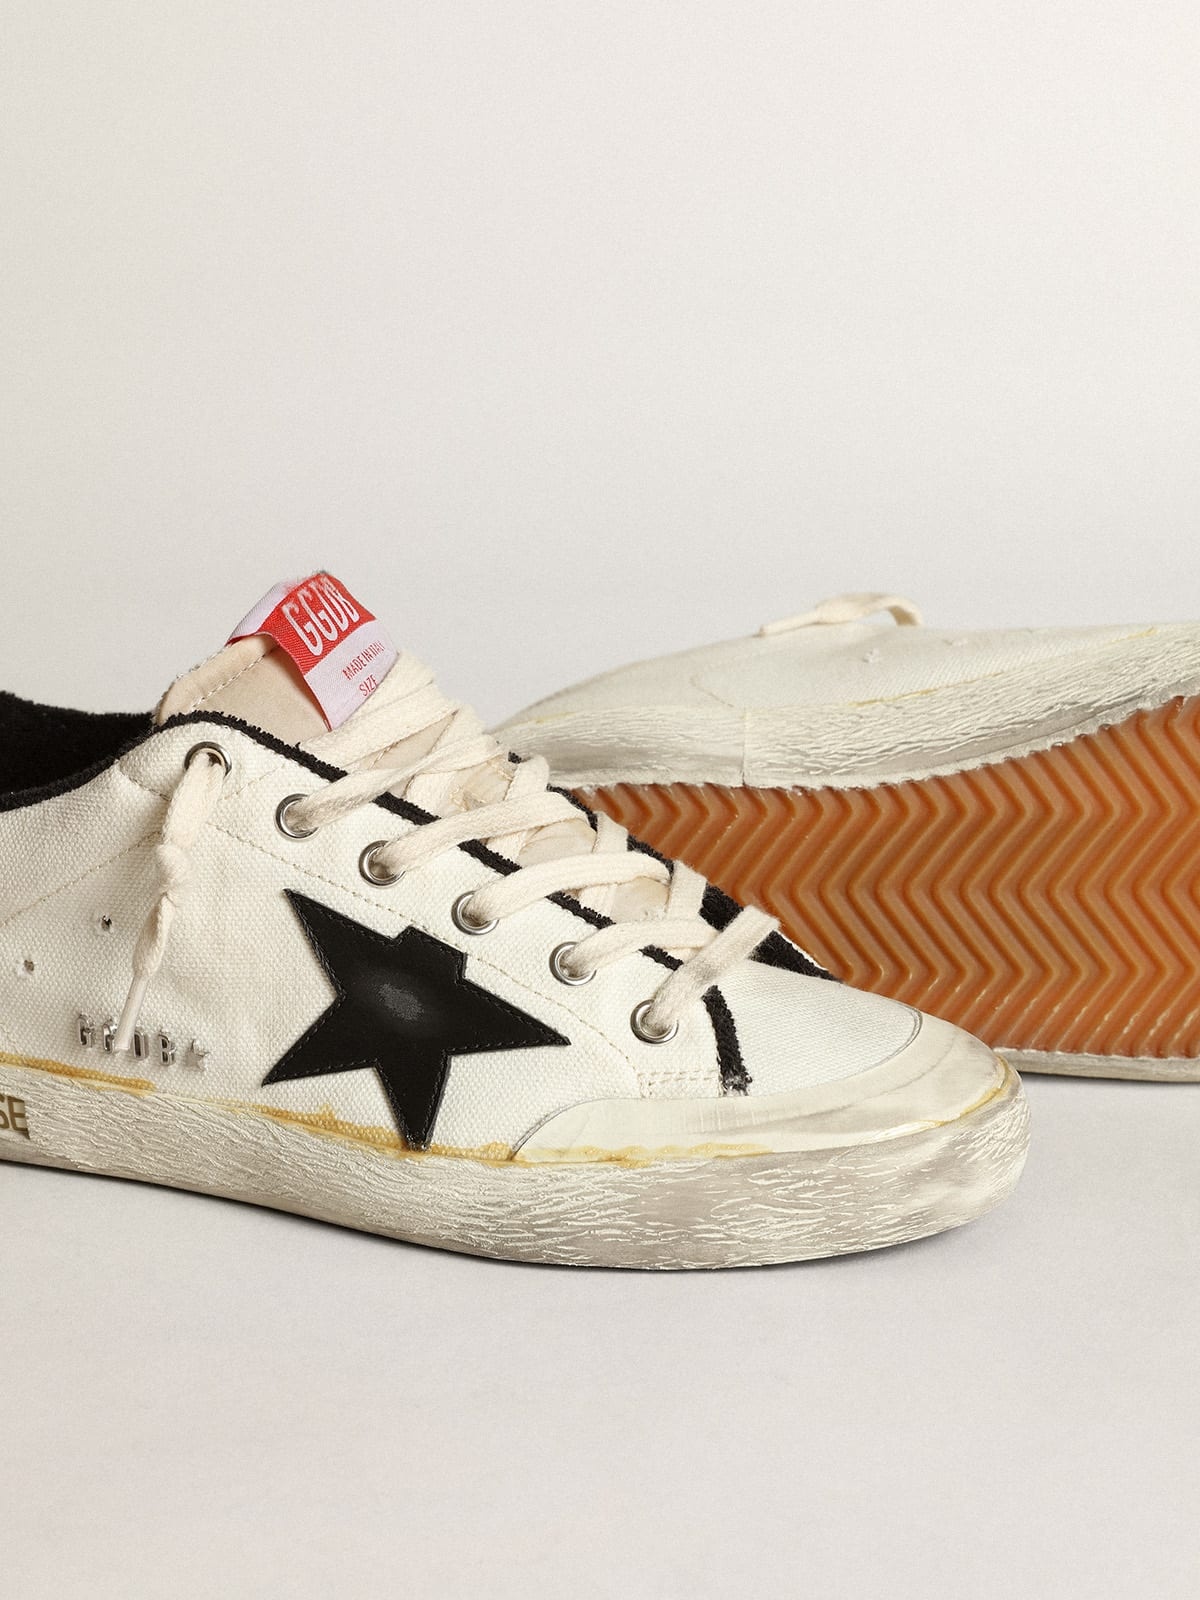 Women’s Super-Star LTD sneakers in beige canvas with black leather star and white leather heel tab - 3